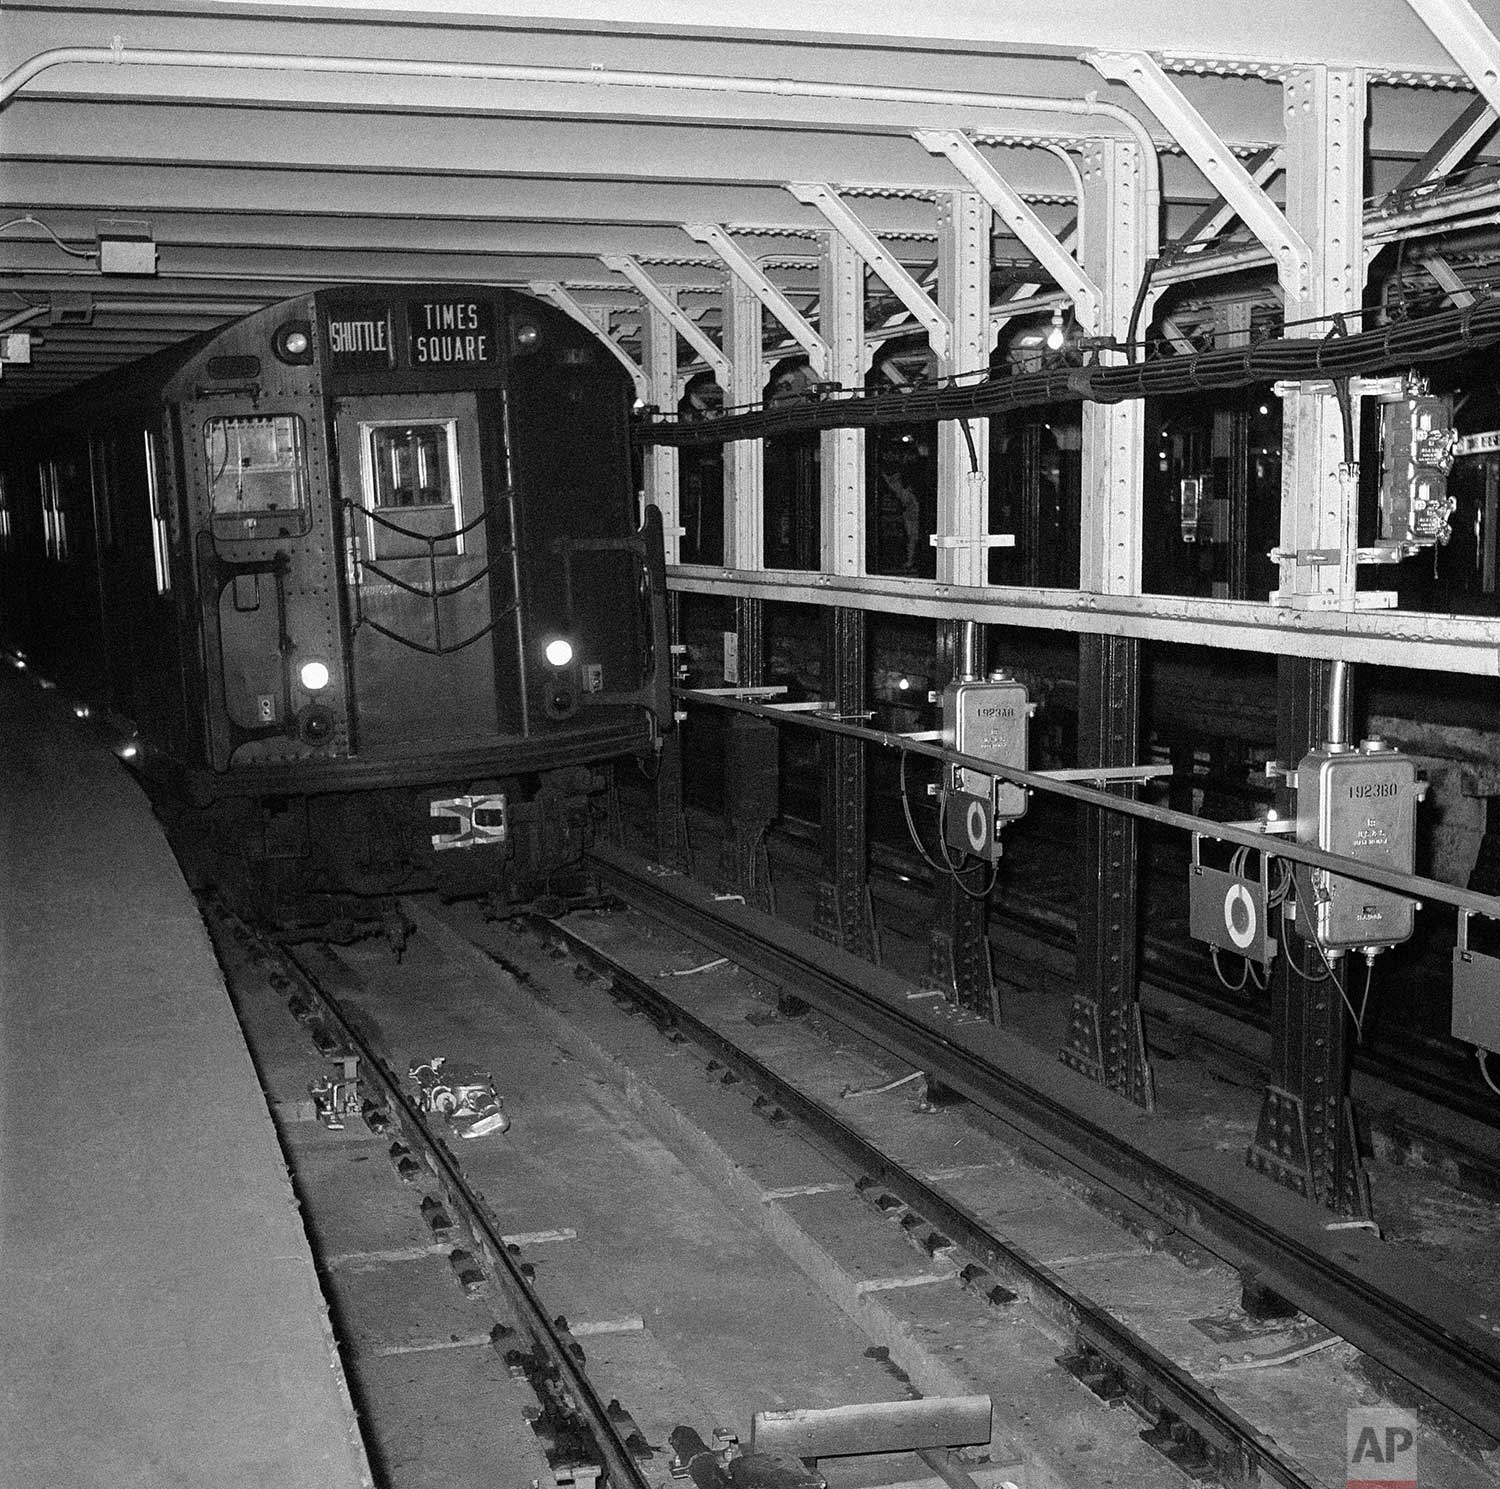  This is a head-on view of the automated subway shuttle train, scheduled to operate between Grand Central Station on New York's East Side and Times Square on the West Side of Manhattan, Dec. 13, 1961. The train is slowing to a stop at the Times Squar